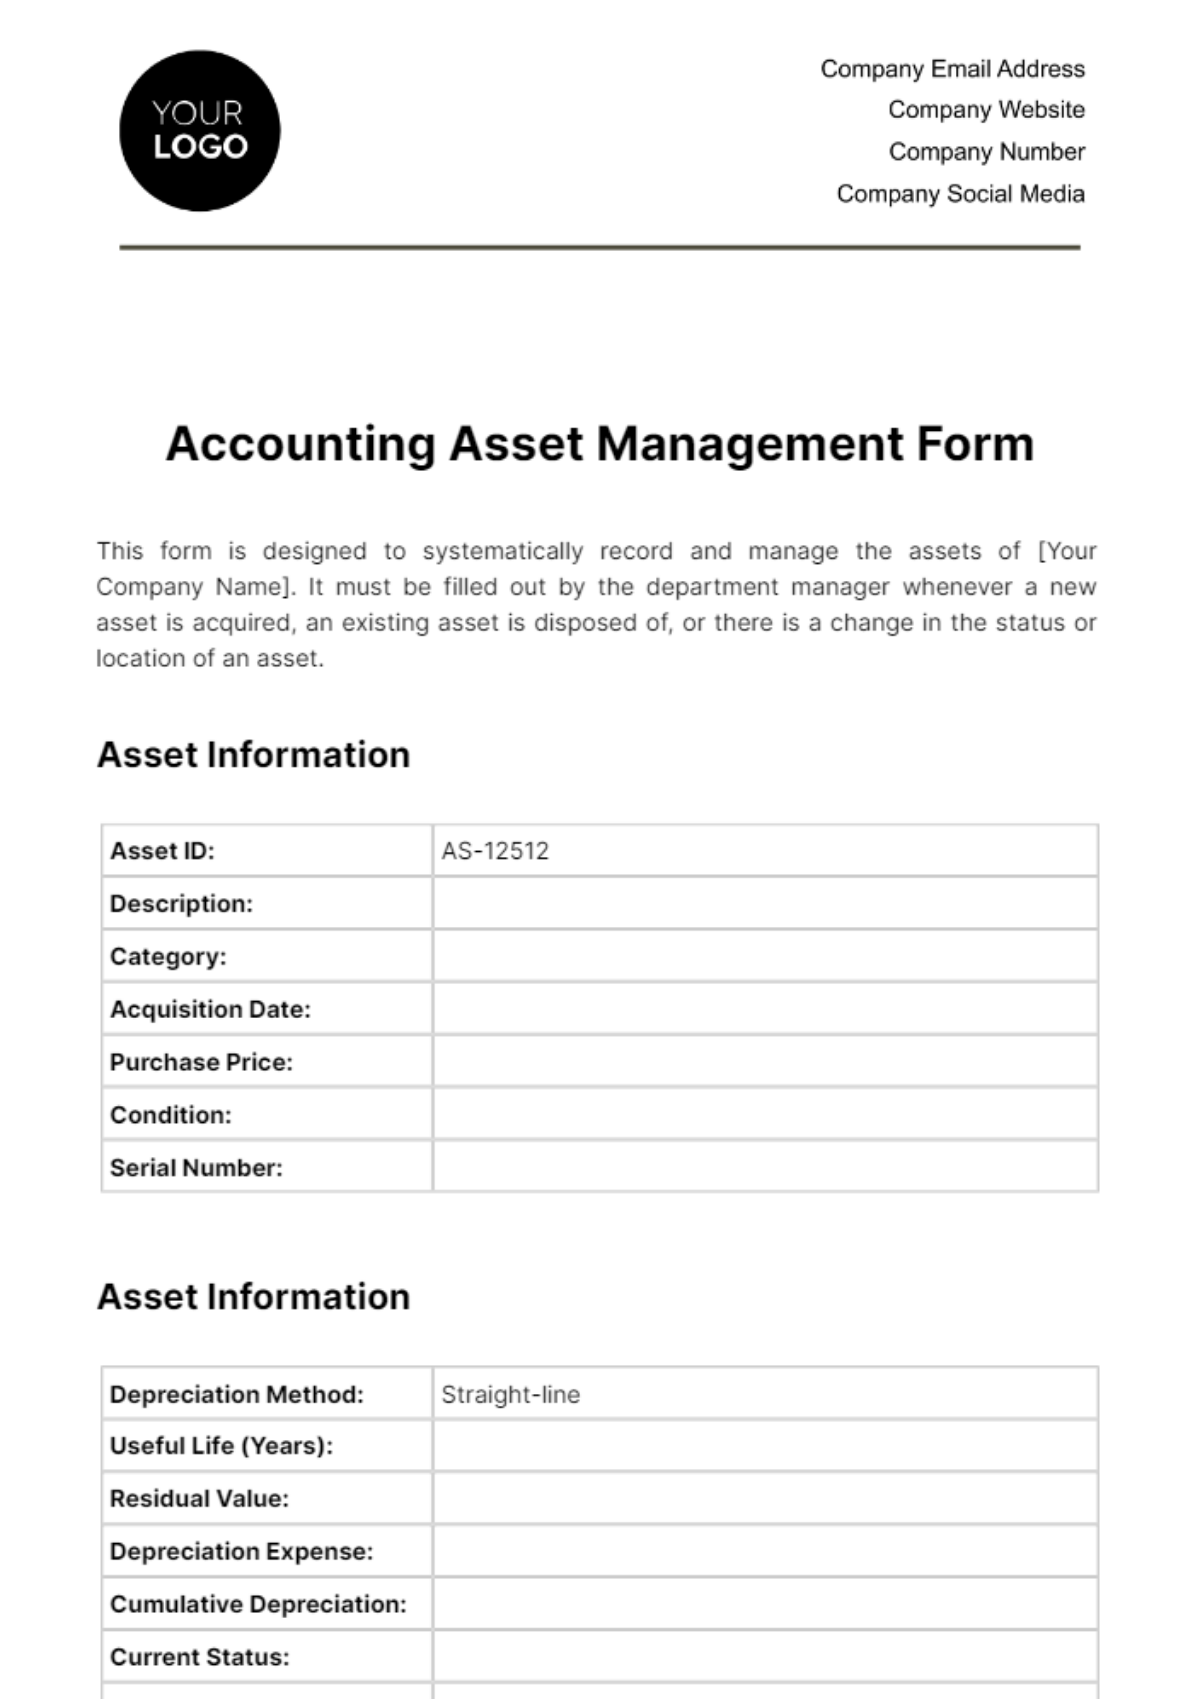 Accounting Asset Management Form Template